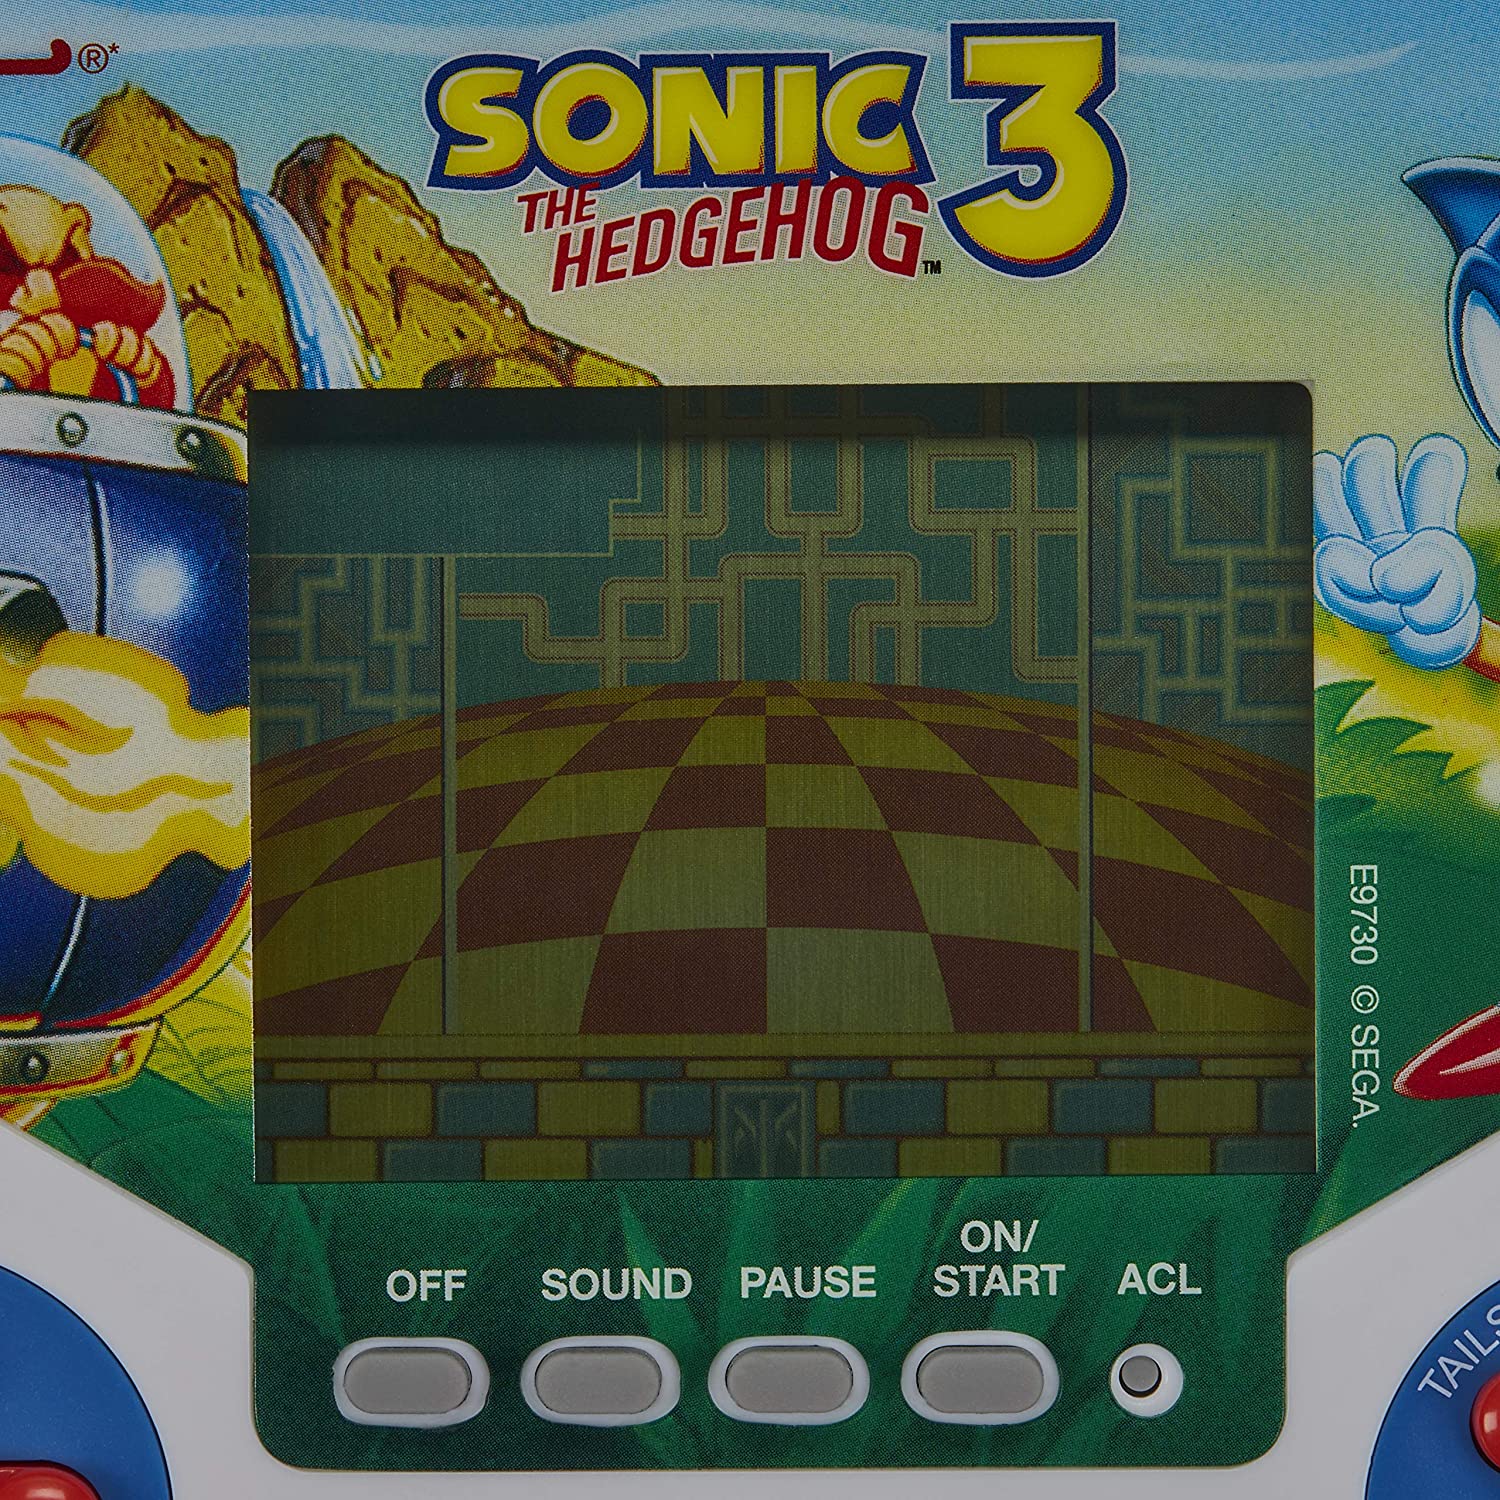 Hasbro Gaming Tiger Electronics Sonic The Hedgehog 3 Electronic LCD Video Game, Retro-Inspired Edition